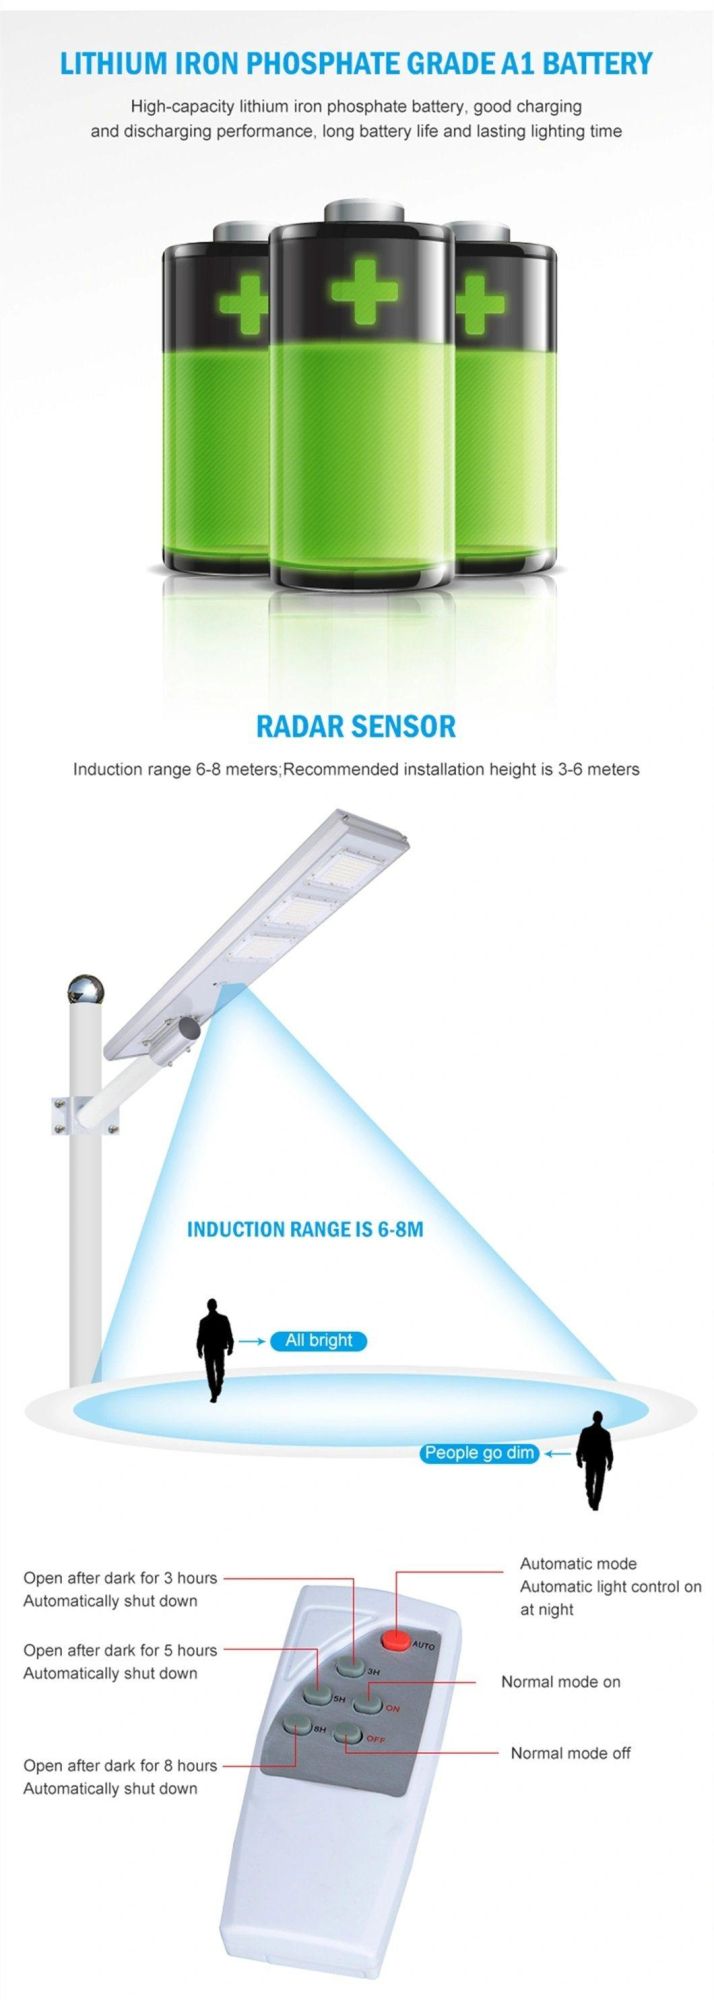 Waterproof LED Outdoor OEM ODM All in One Integrated Solar Power Garden Road Street Light with Lithium Battery Flickering